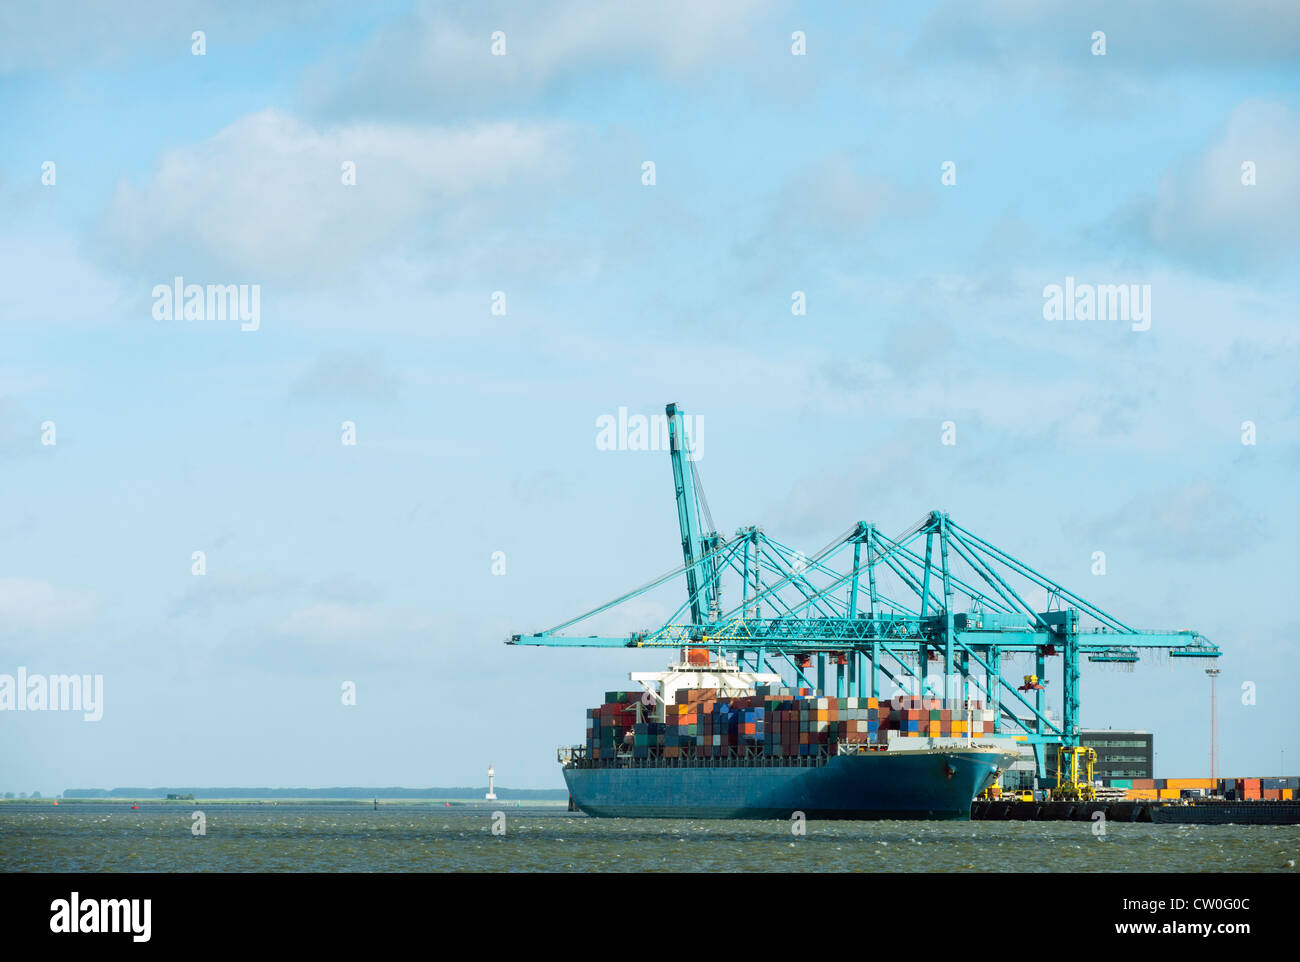 Container ship docked at harbor Stock Photo